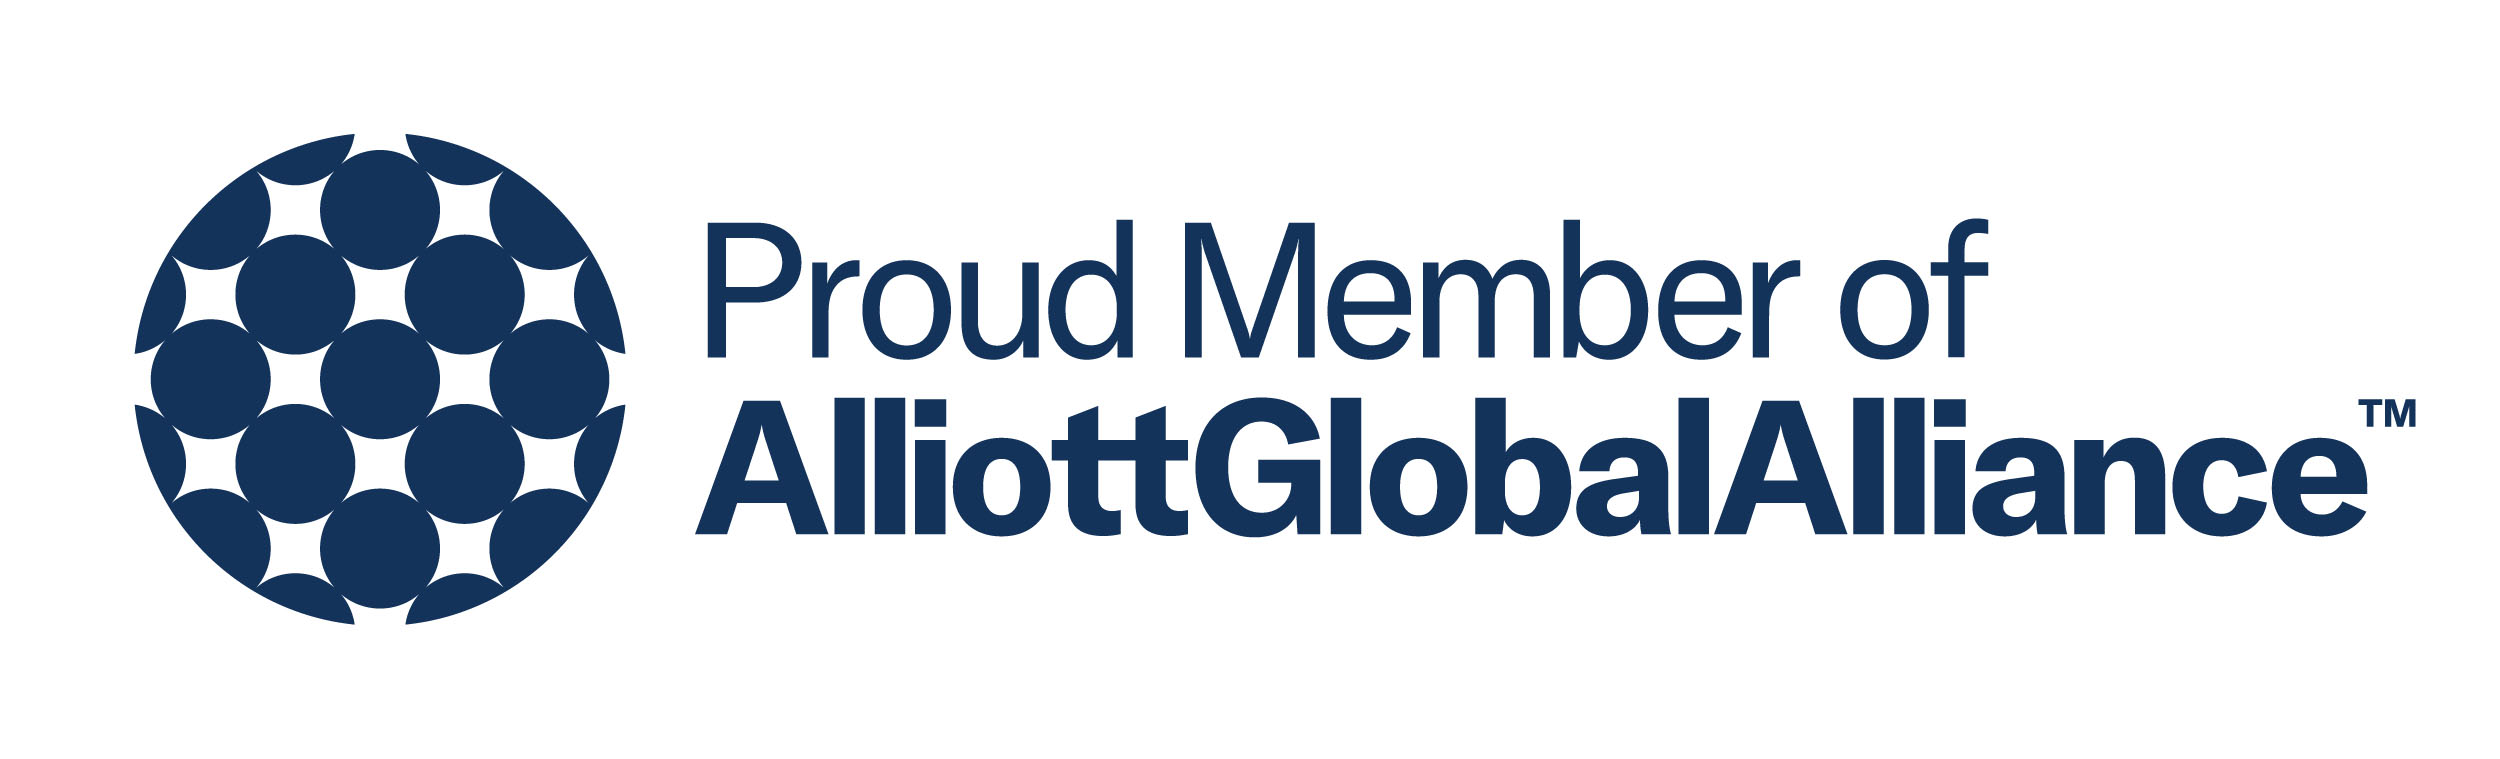 Member of the Alliott Global Alliance, a worldwide alliance of independent accounting, law and consulting firms